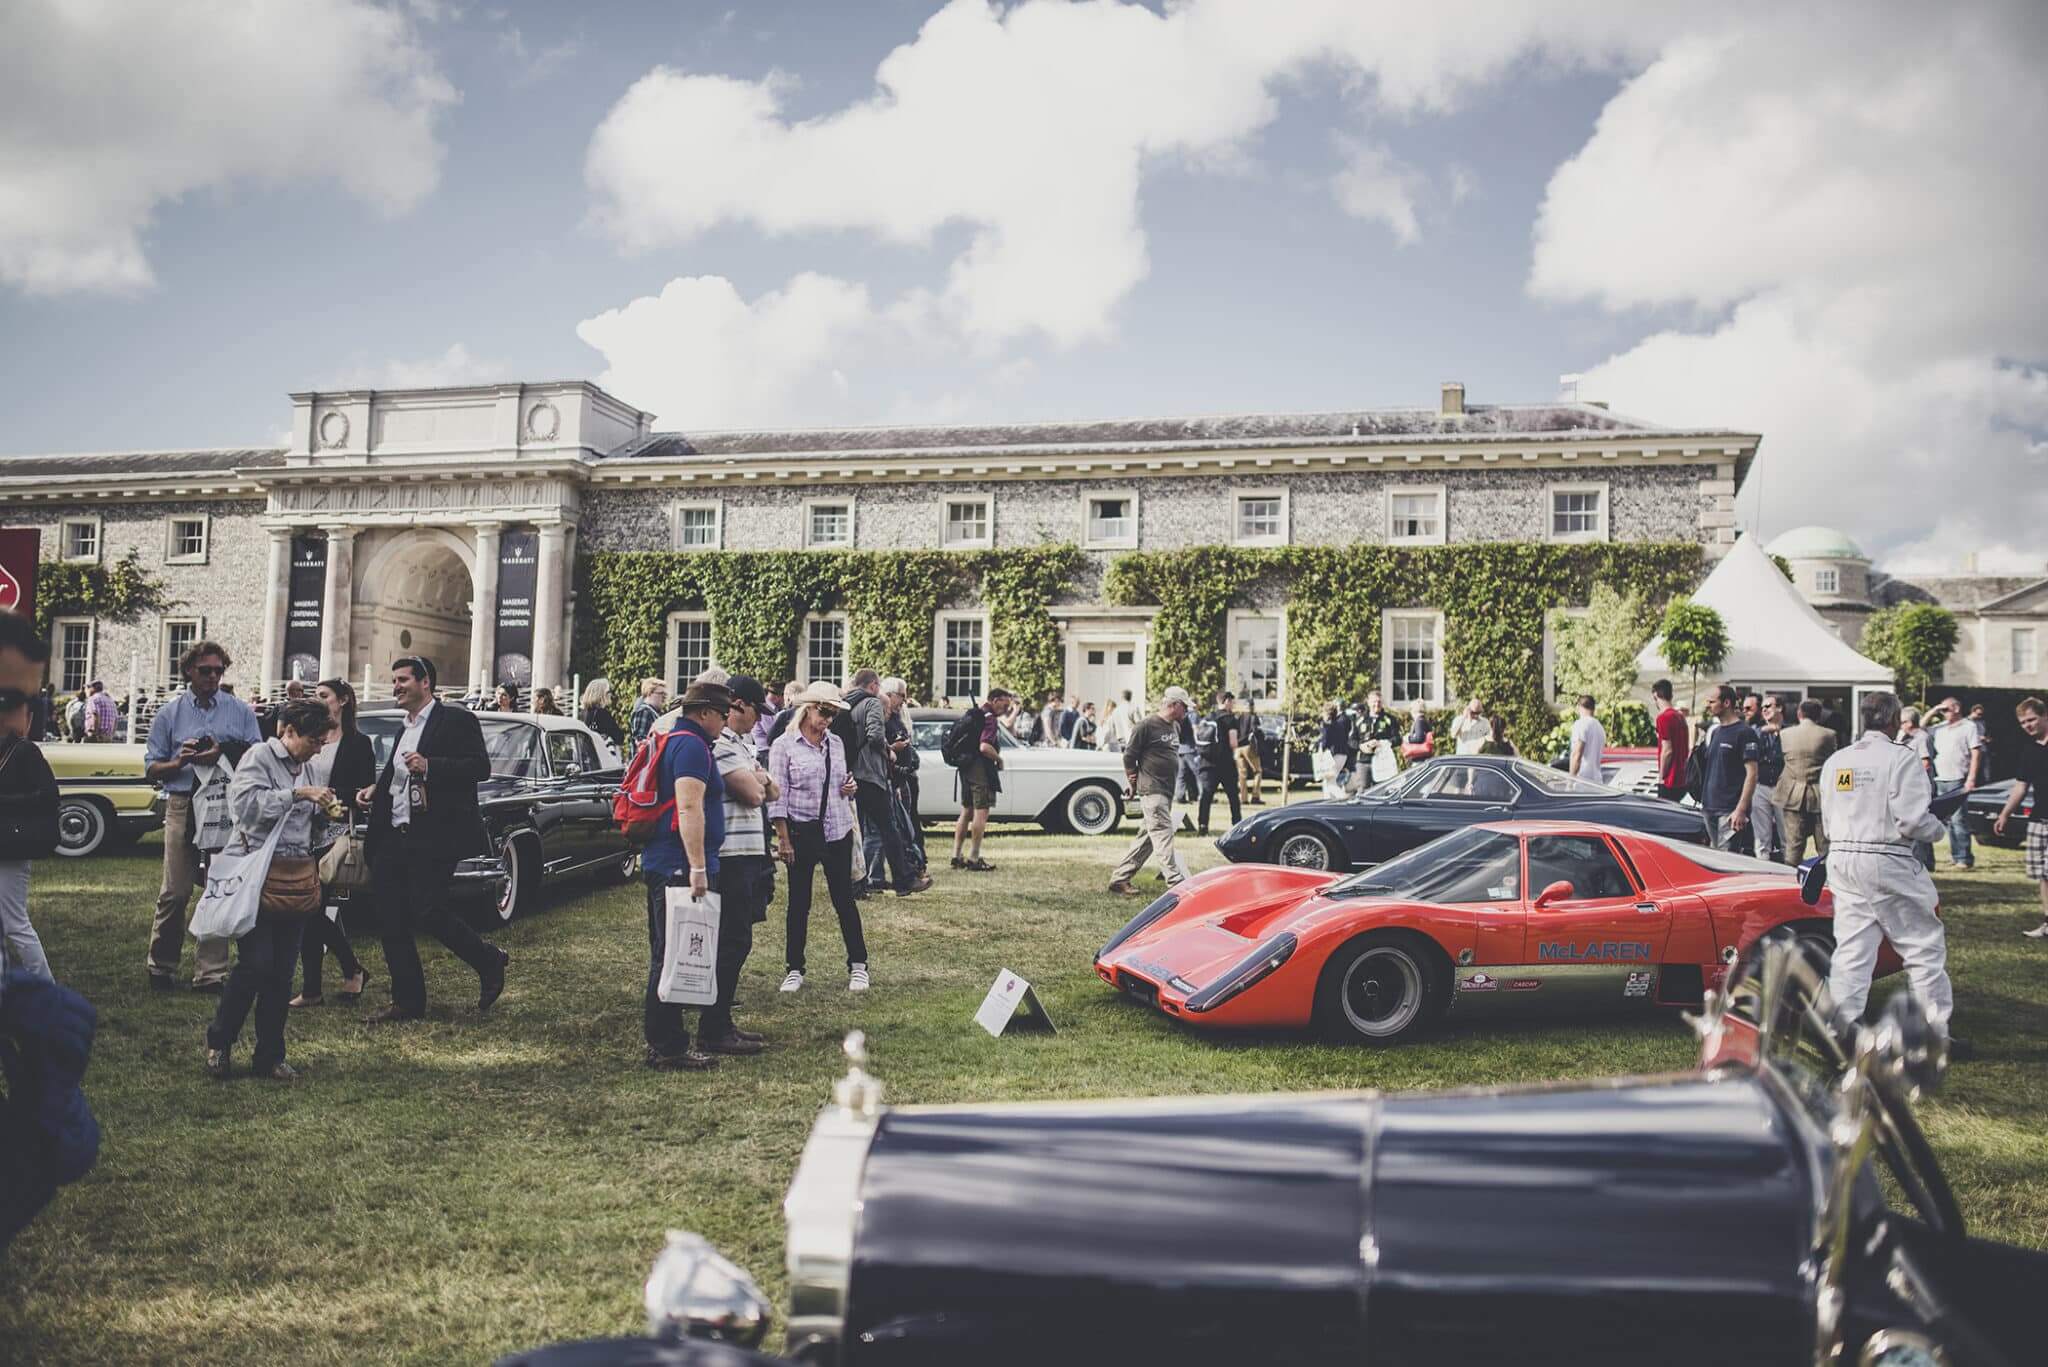 Library Lawn hospitality area at Goodwood